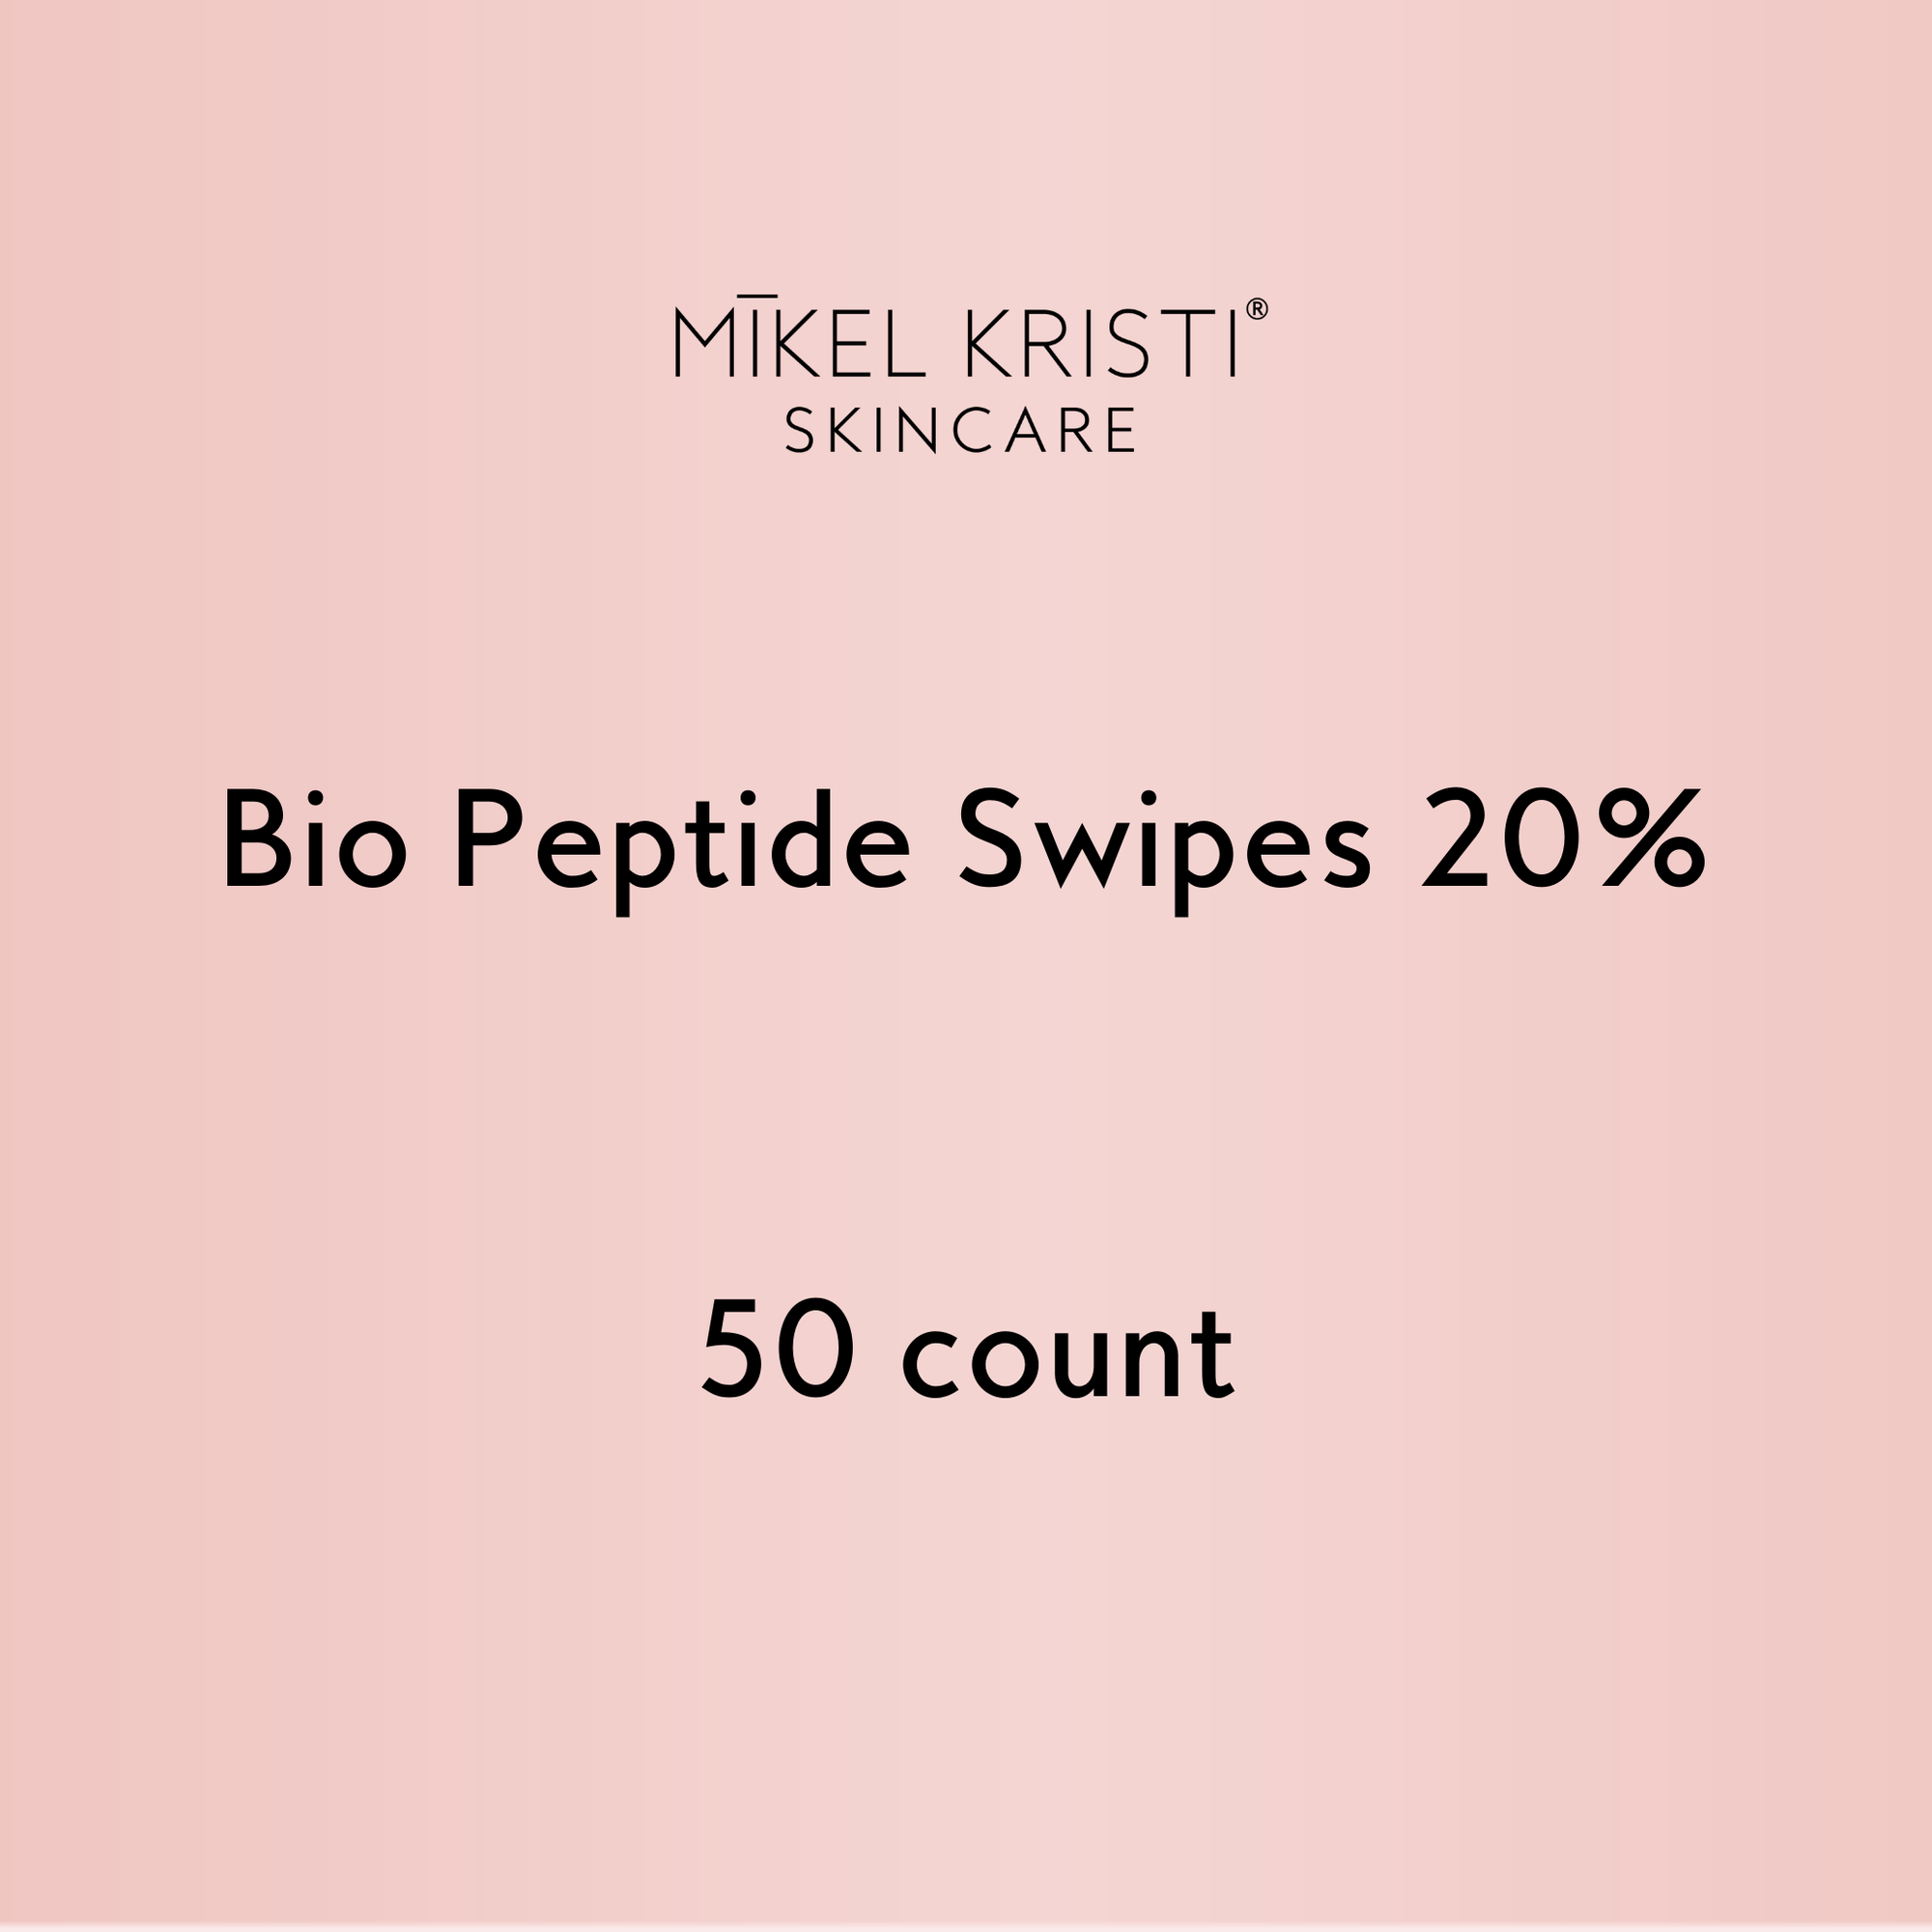 Bio Peptide Swipes 20% are for professional use only. Please contact wholesaleinfo@mikelkristi.com for pricing, approval, or to learn more.